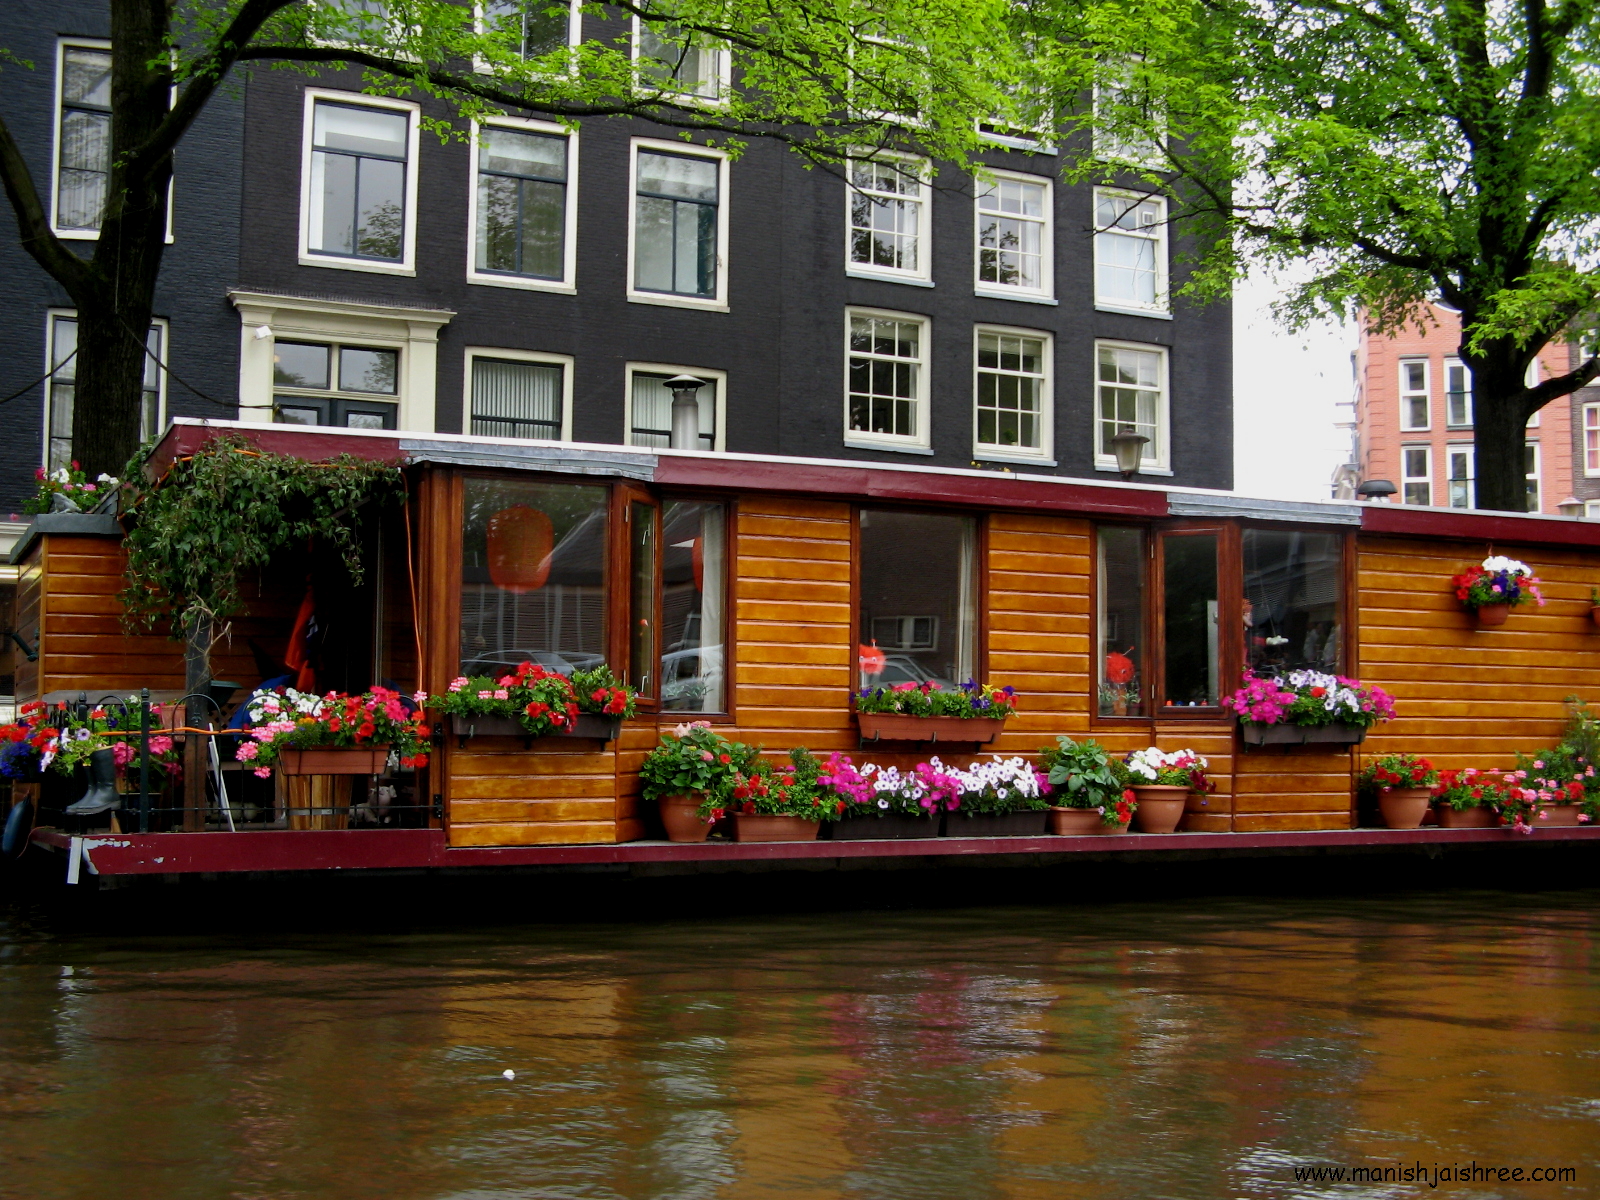 House Boat in Amsterdam